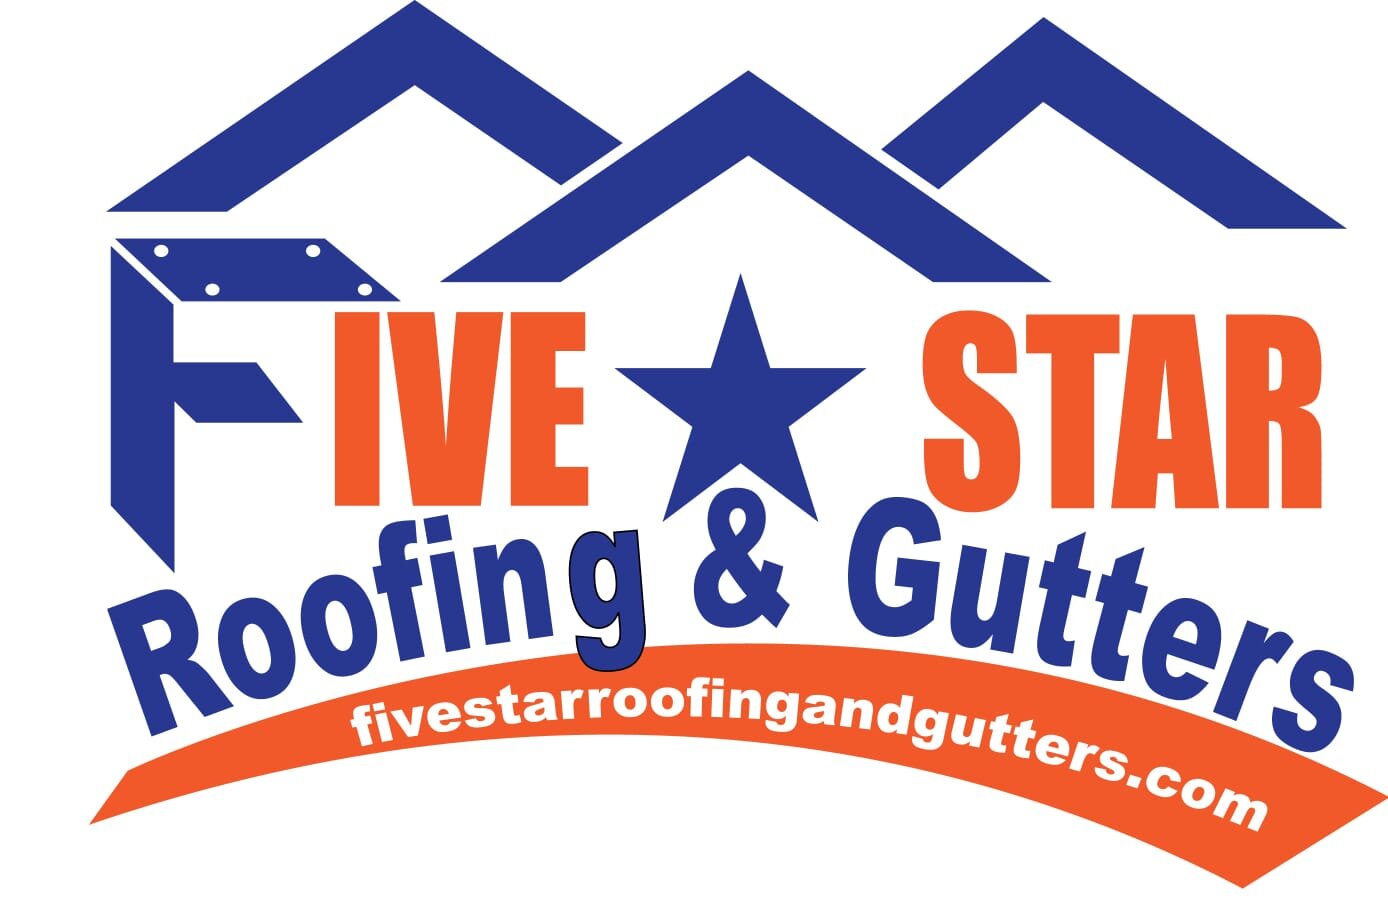 Five Star Roofing roofing, gutter, siding, painting